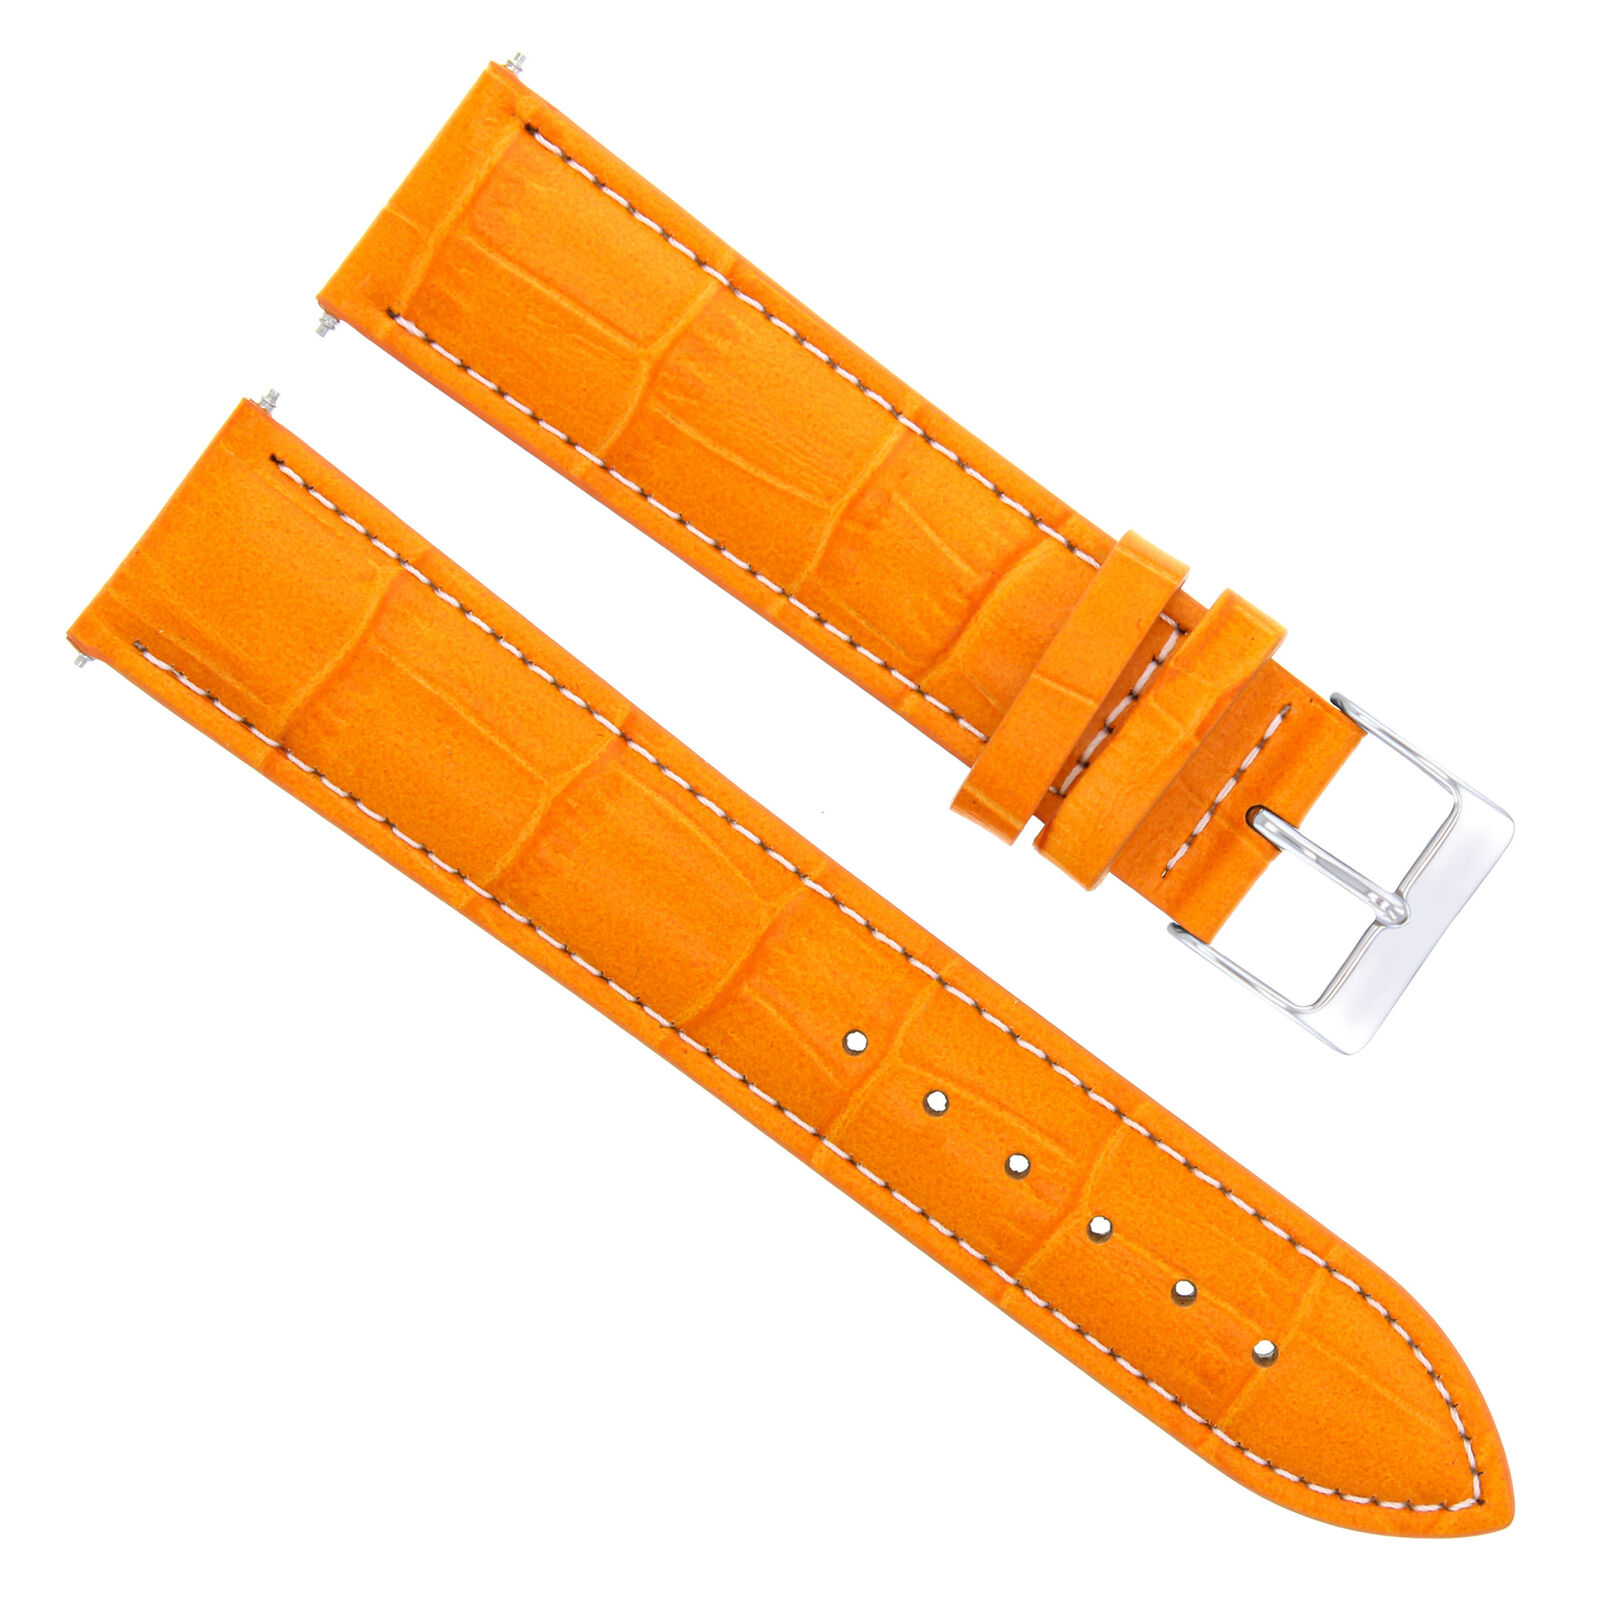 19MM NEW LEATHER BAND STRAP FOR MENS TUDOR PRINCE WATCH ORANGE WHITE STITCH